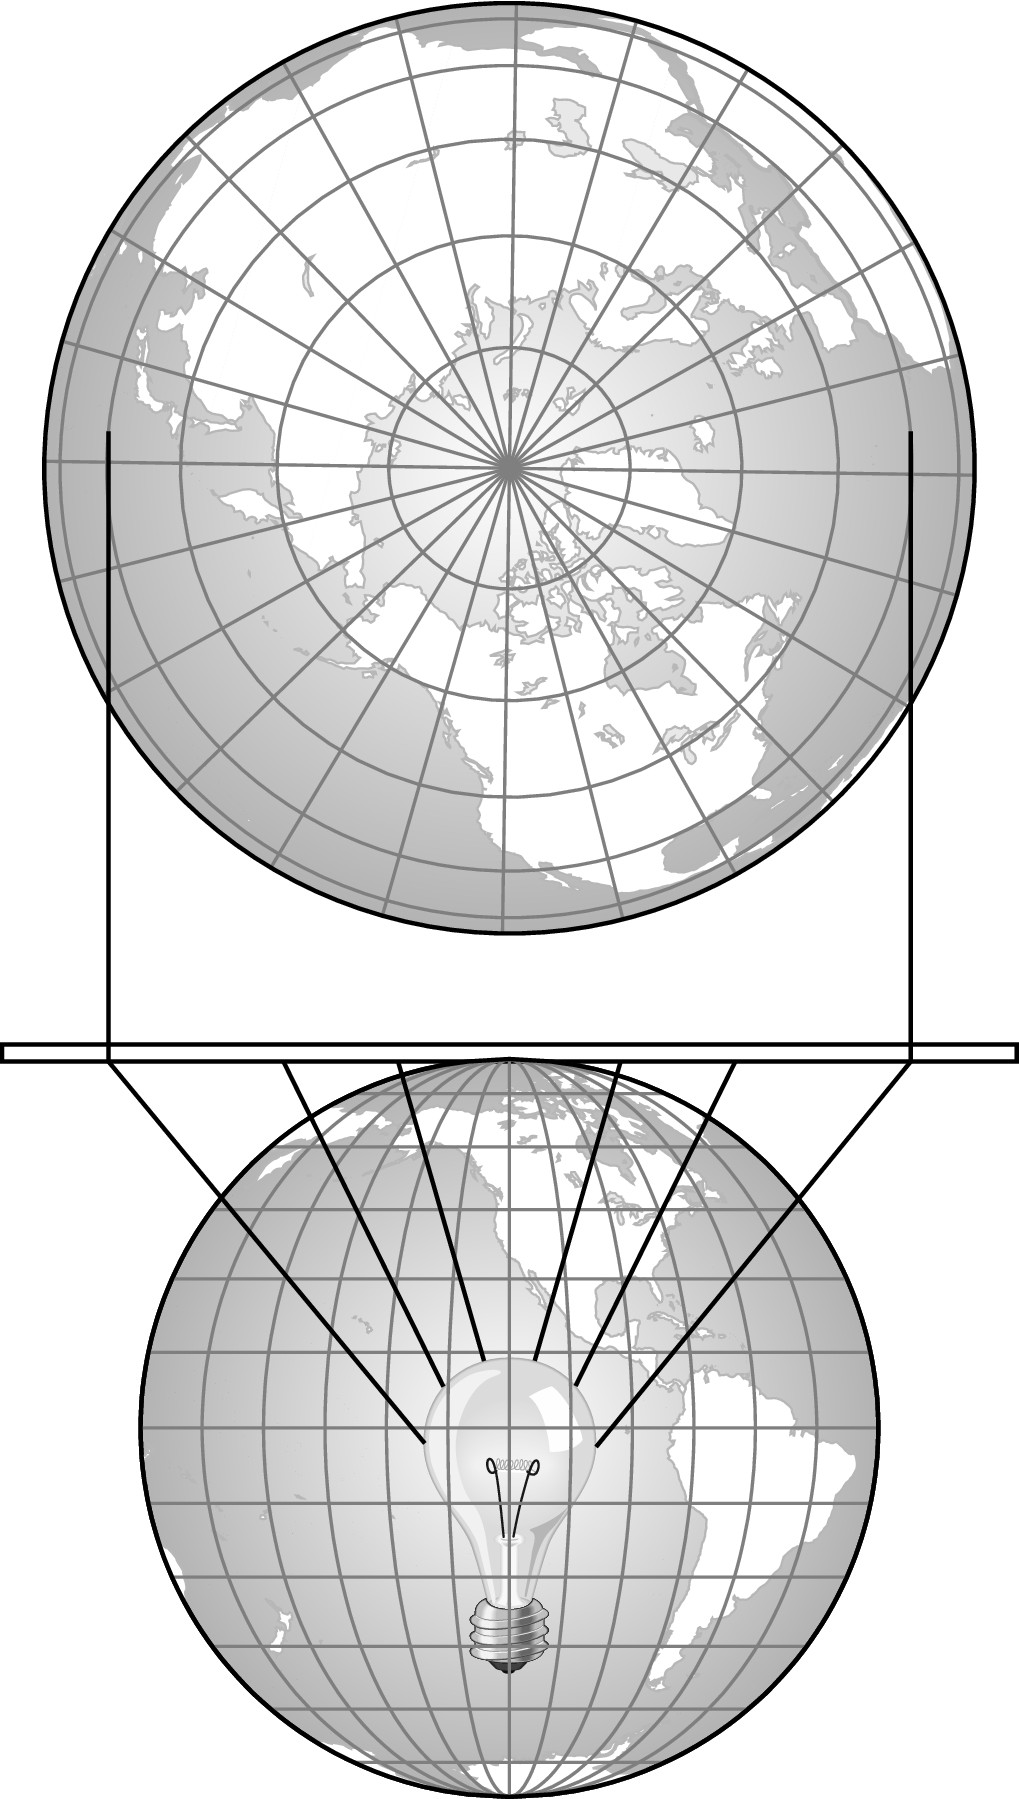 Figure 4-1: Map projection.